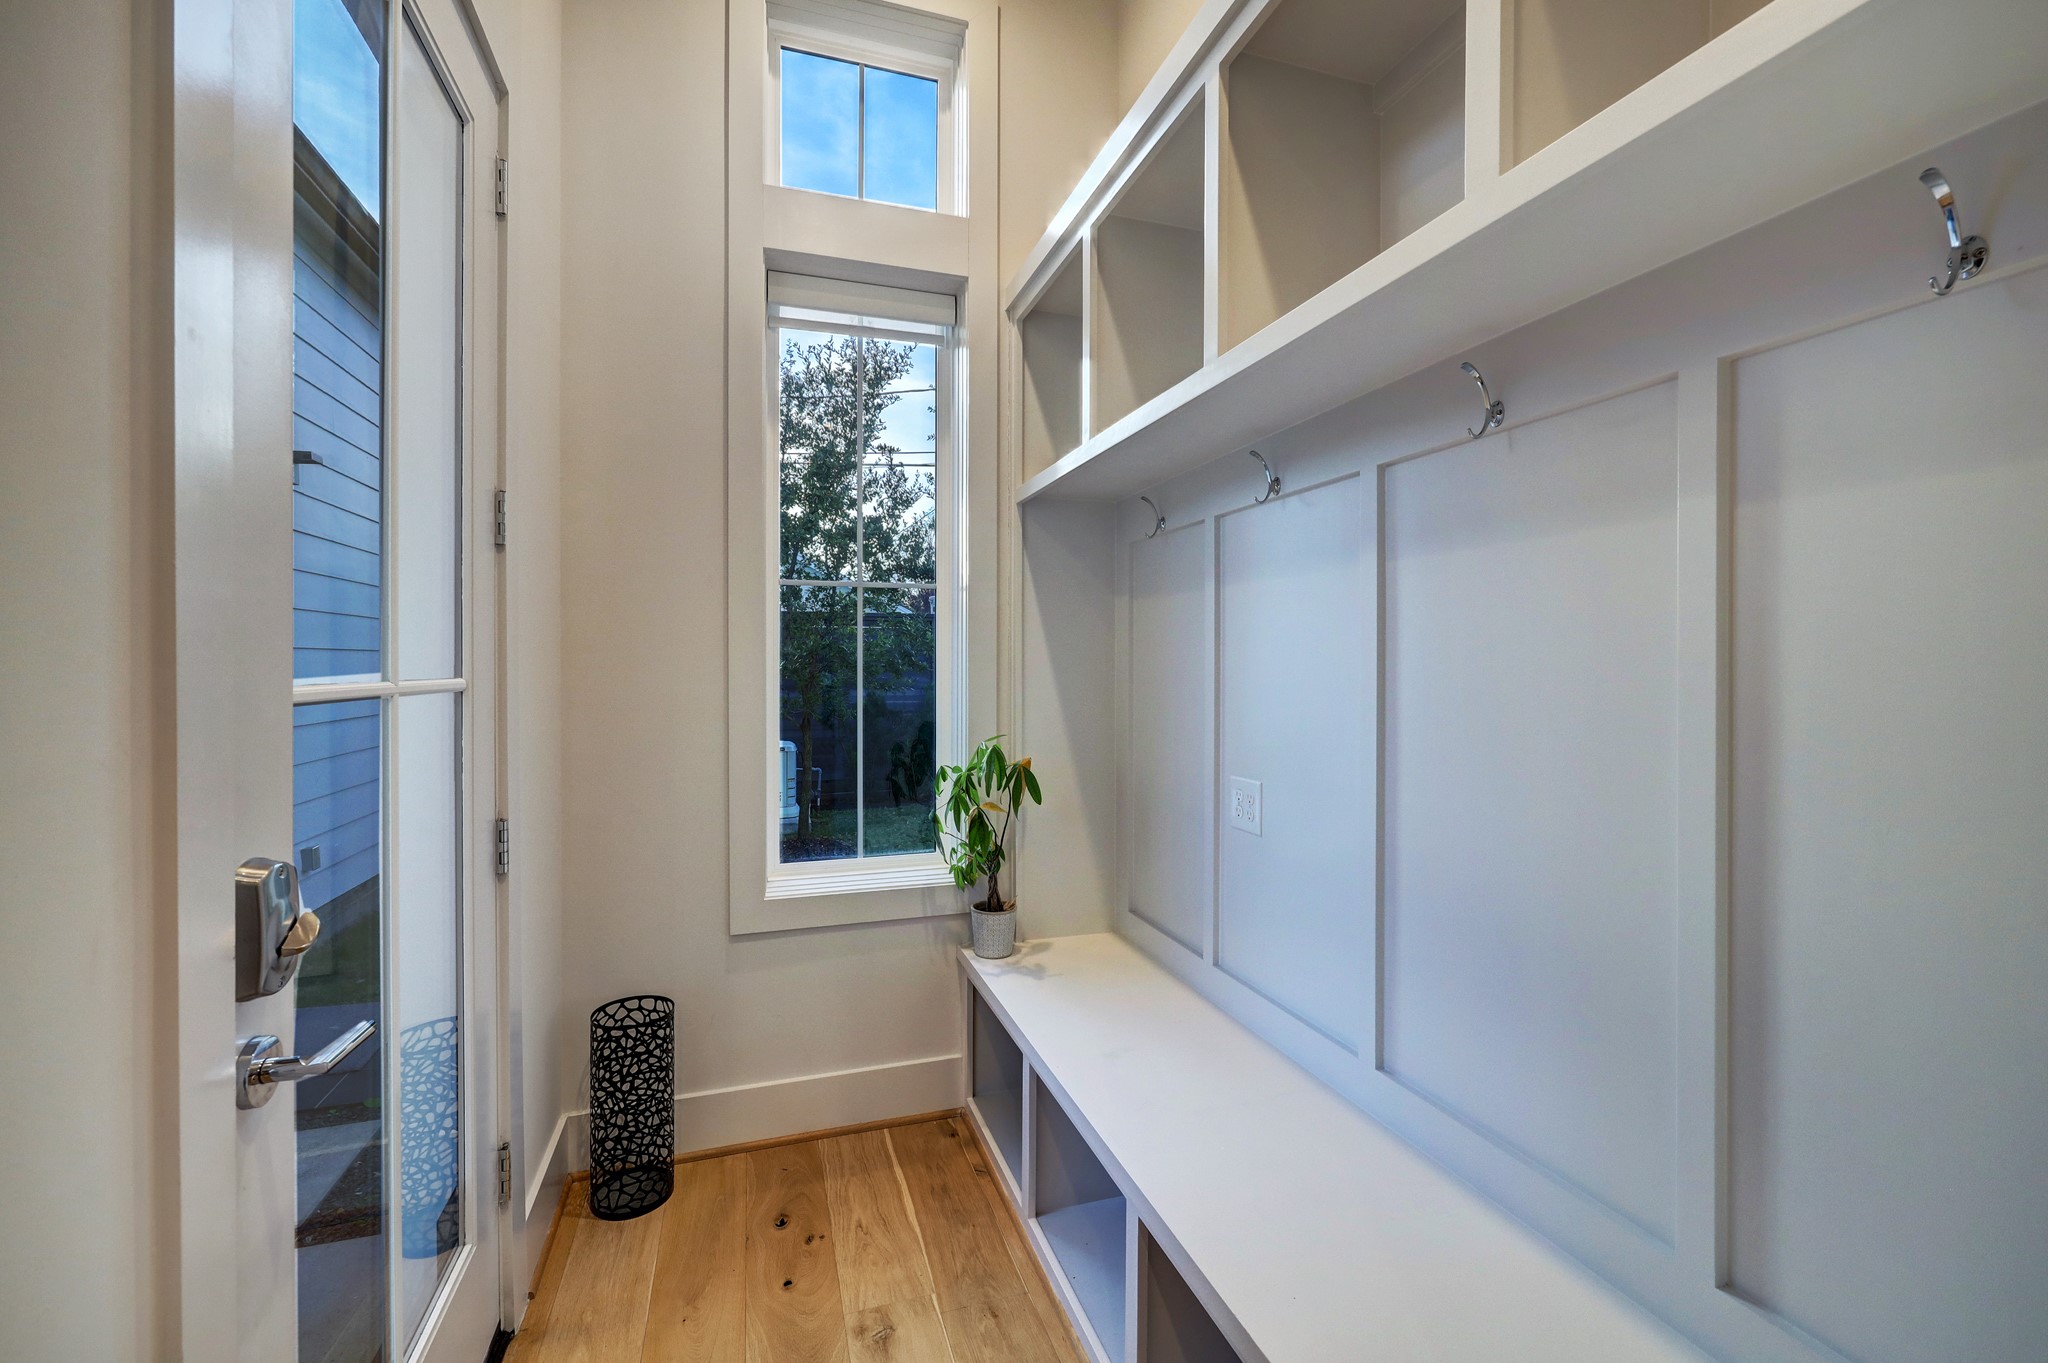 Past the kitchen and living room, a large mudroom with bench seating and cubbies ensures organized arrivals and departures.